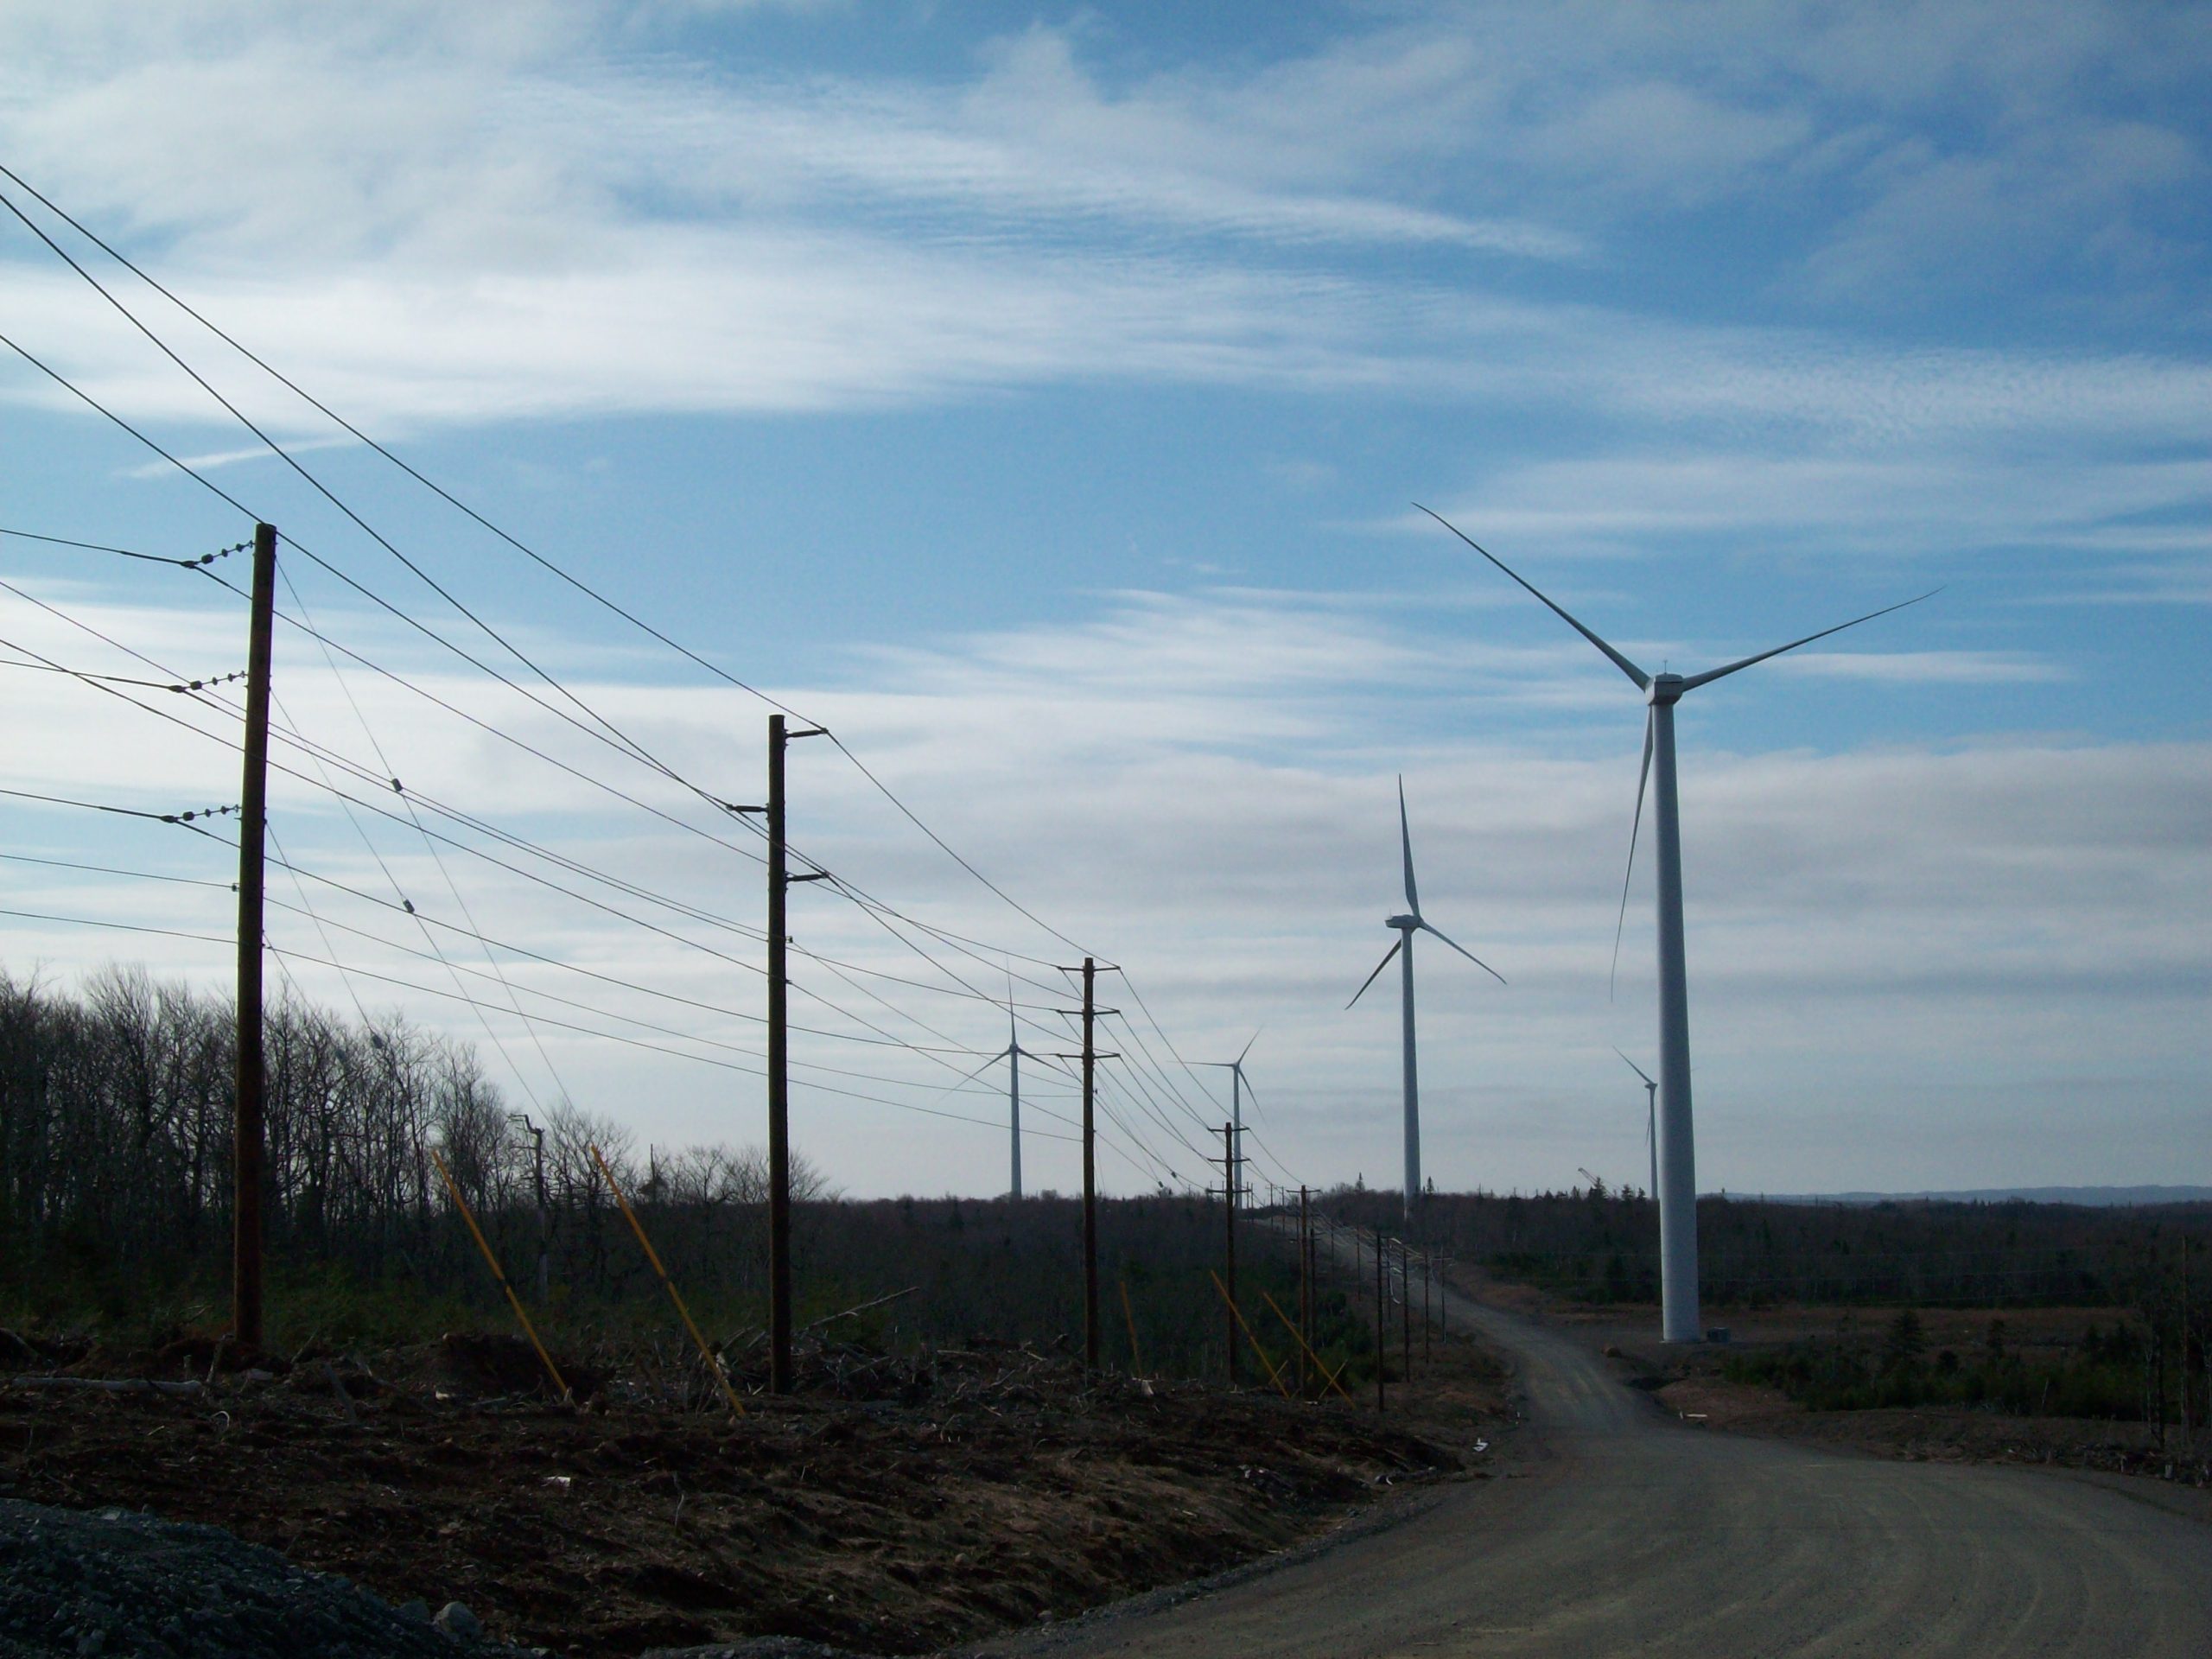 Landscape view of Windmills and Power Lines. Holland Power Services has high voltage solutions for utility, commercial, renewable energy, and industrial customers.